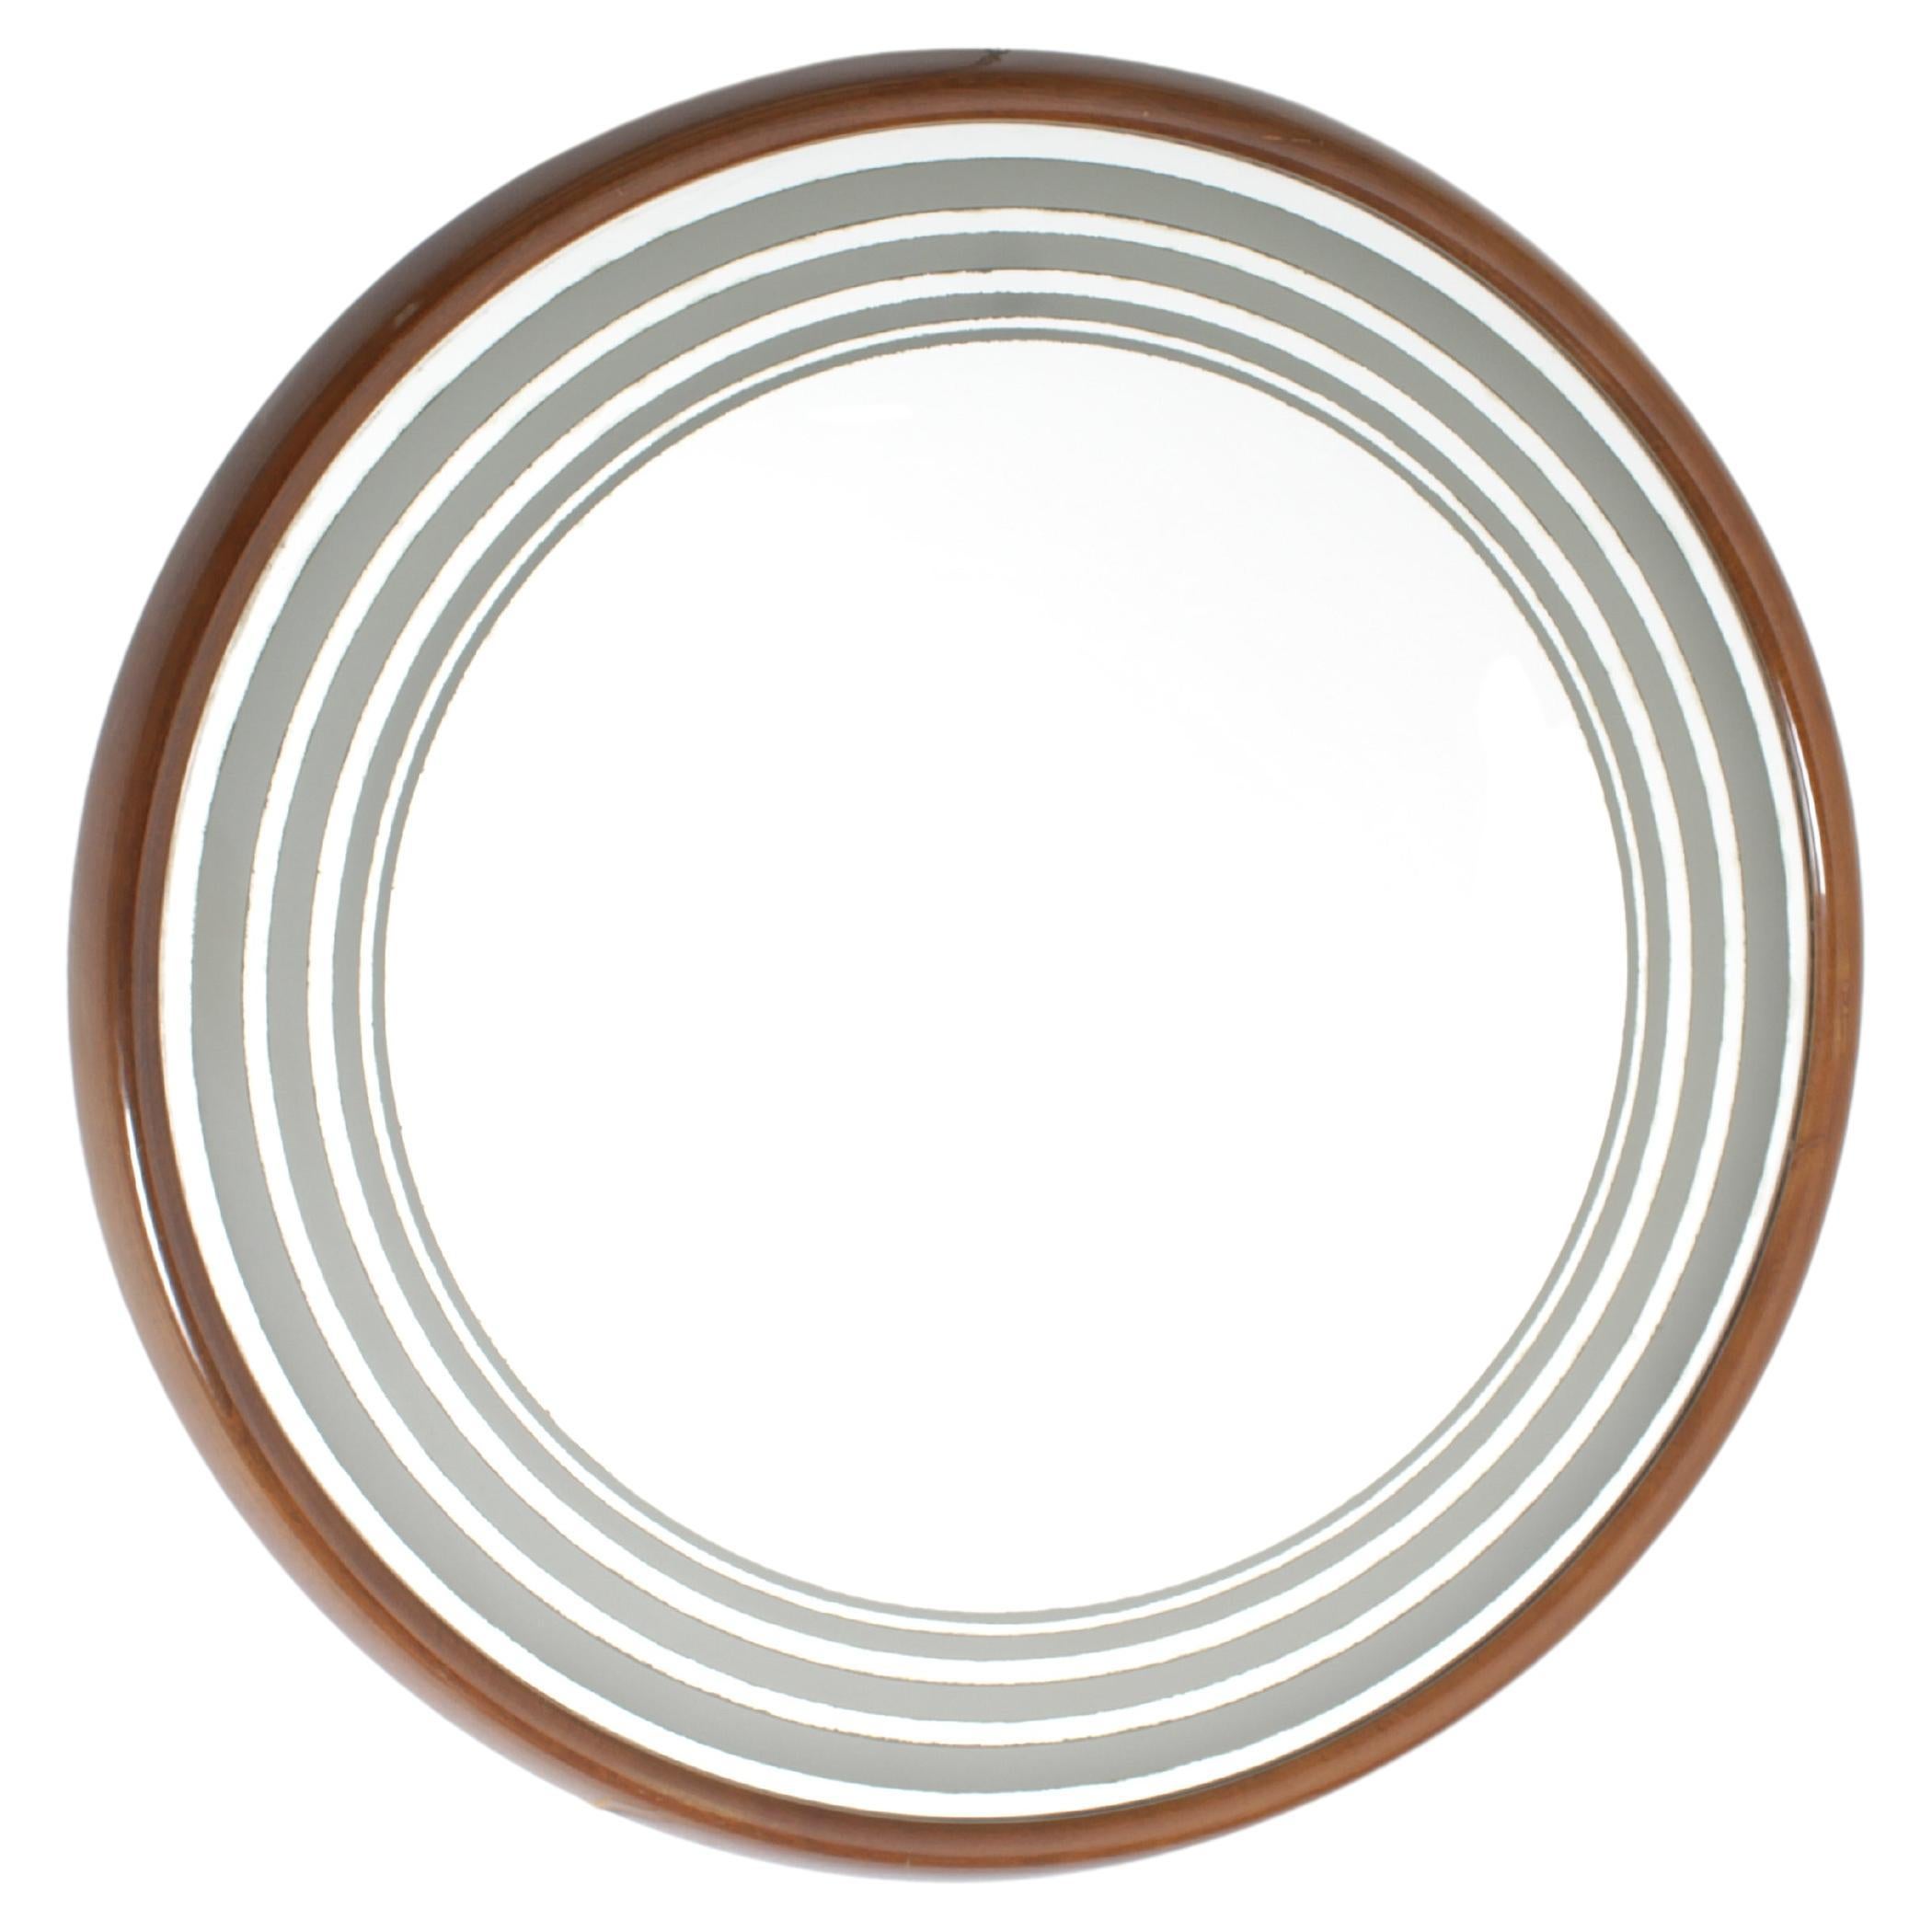 Large and beautiful round wall mirror with beveled wooden frame, backlit with a neon tube.
On the outer edge of the mirror there are five transparent rings through which the light diffuses. Valuable Italian production from the 1960s
Wear consistent